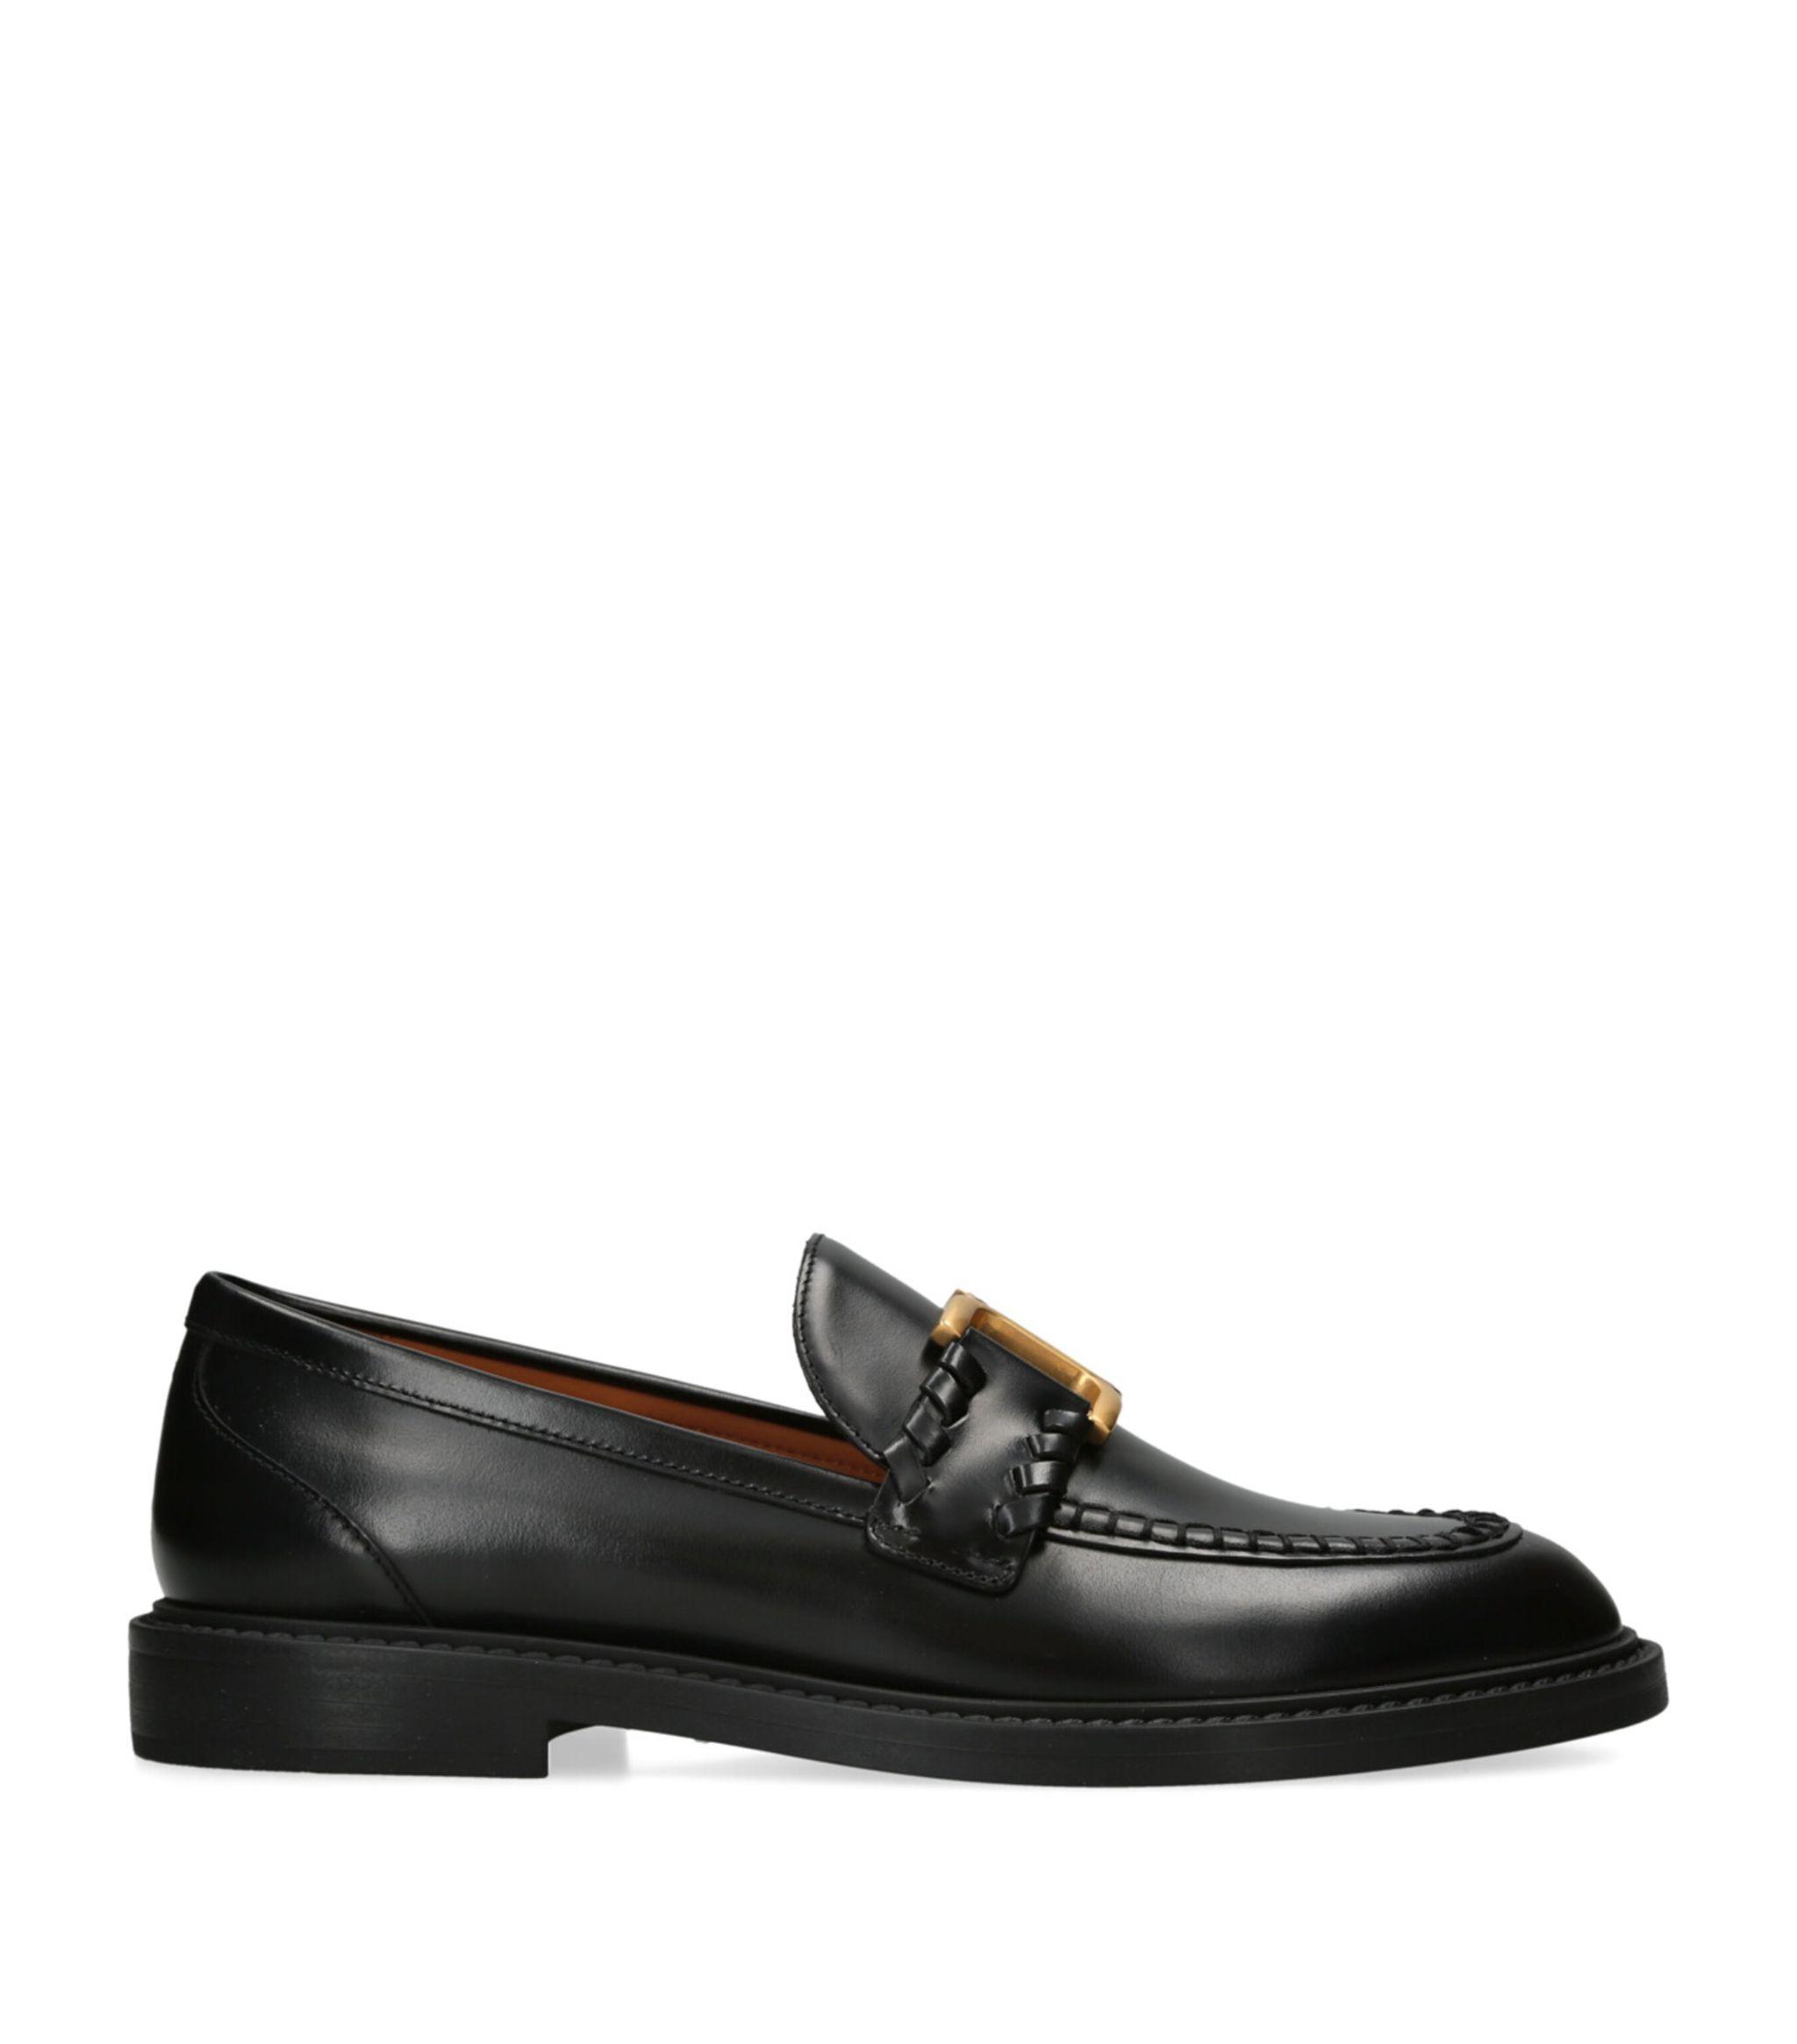 Chloé Leather Marcie Loafer in Black | Lyst